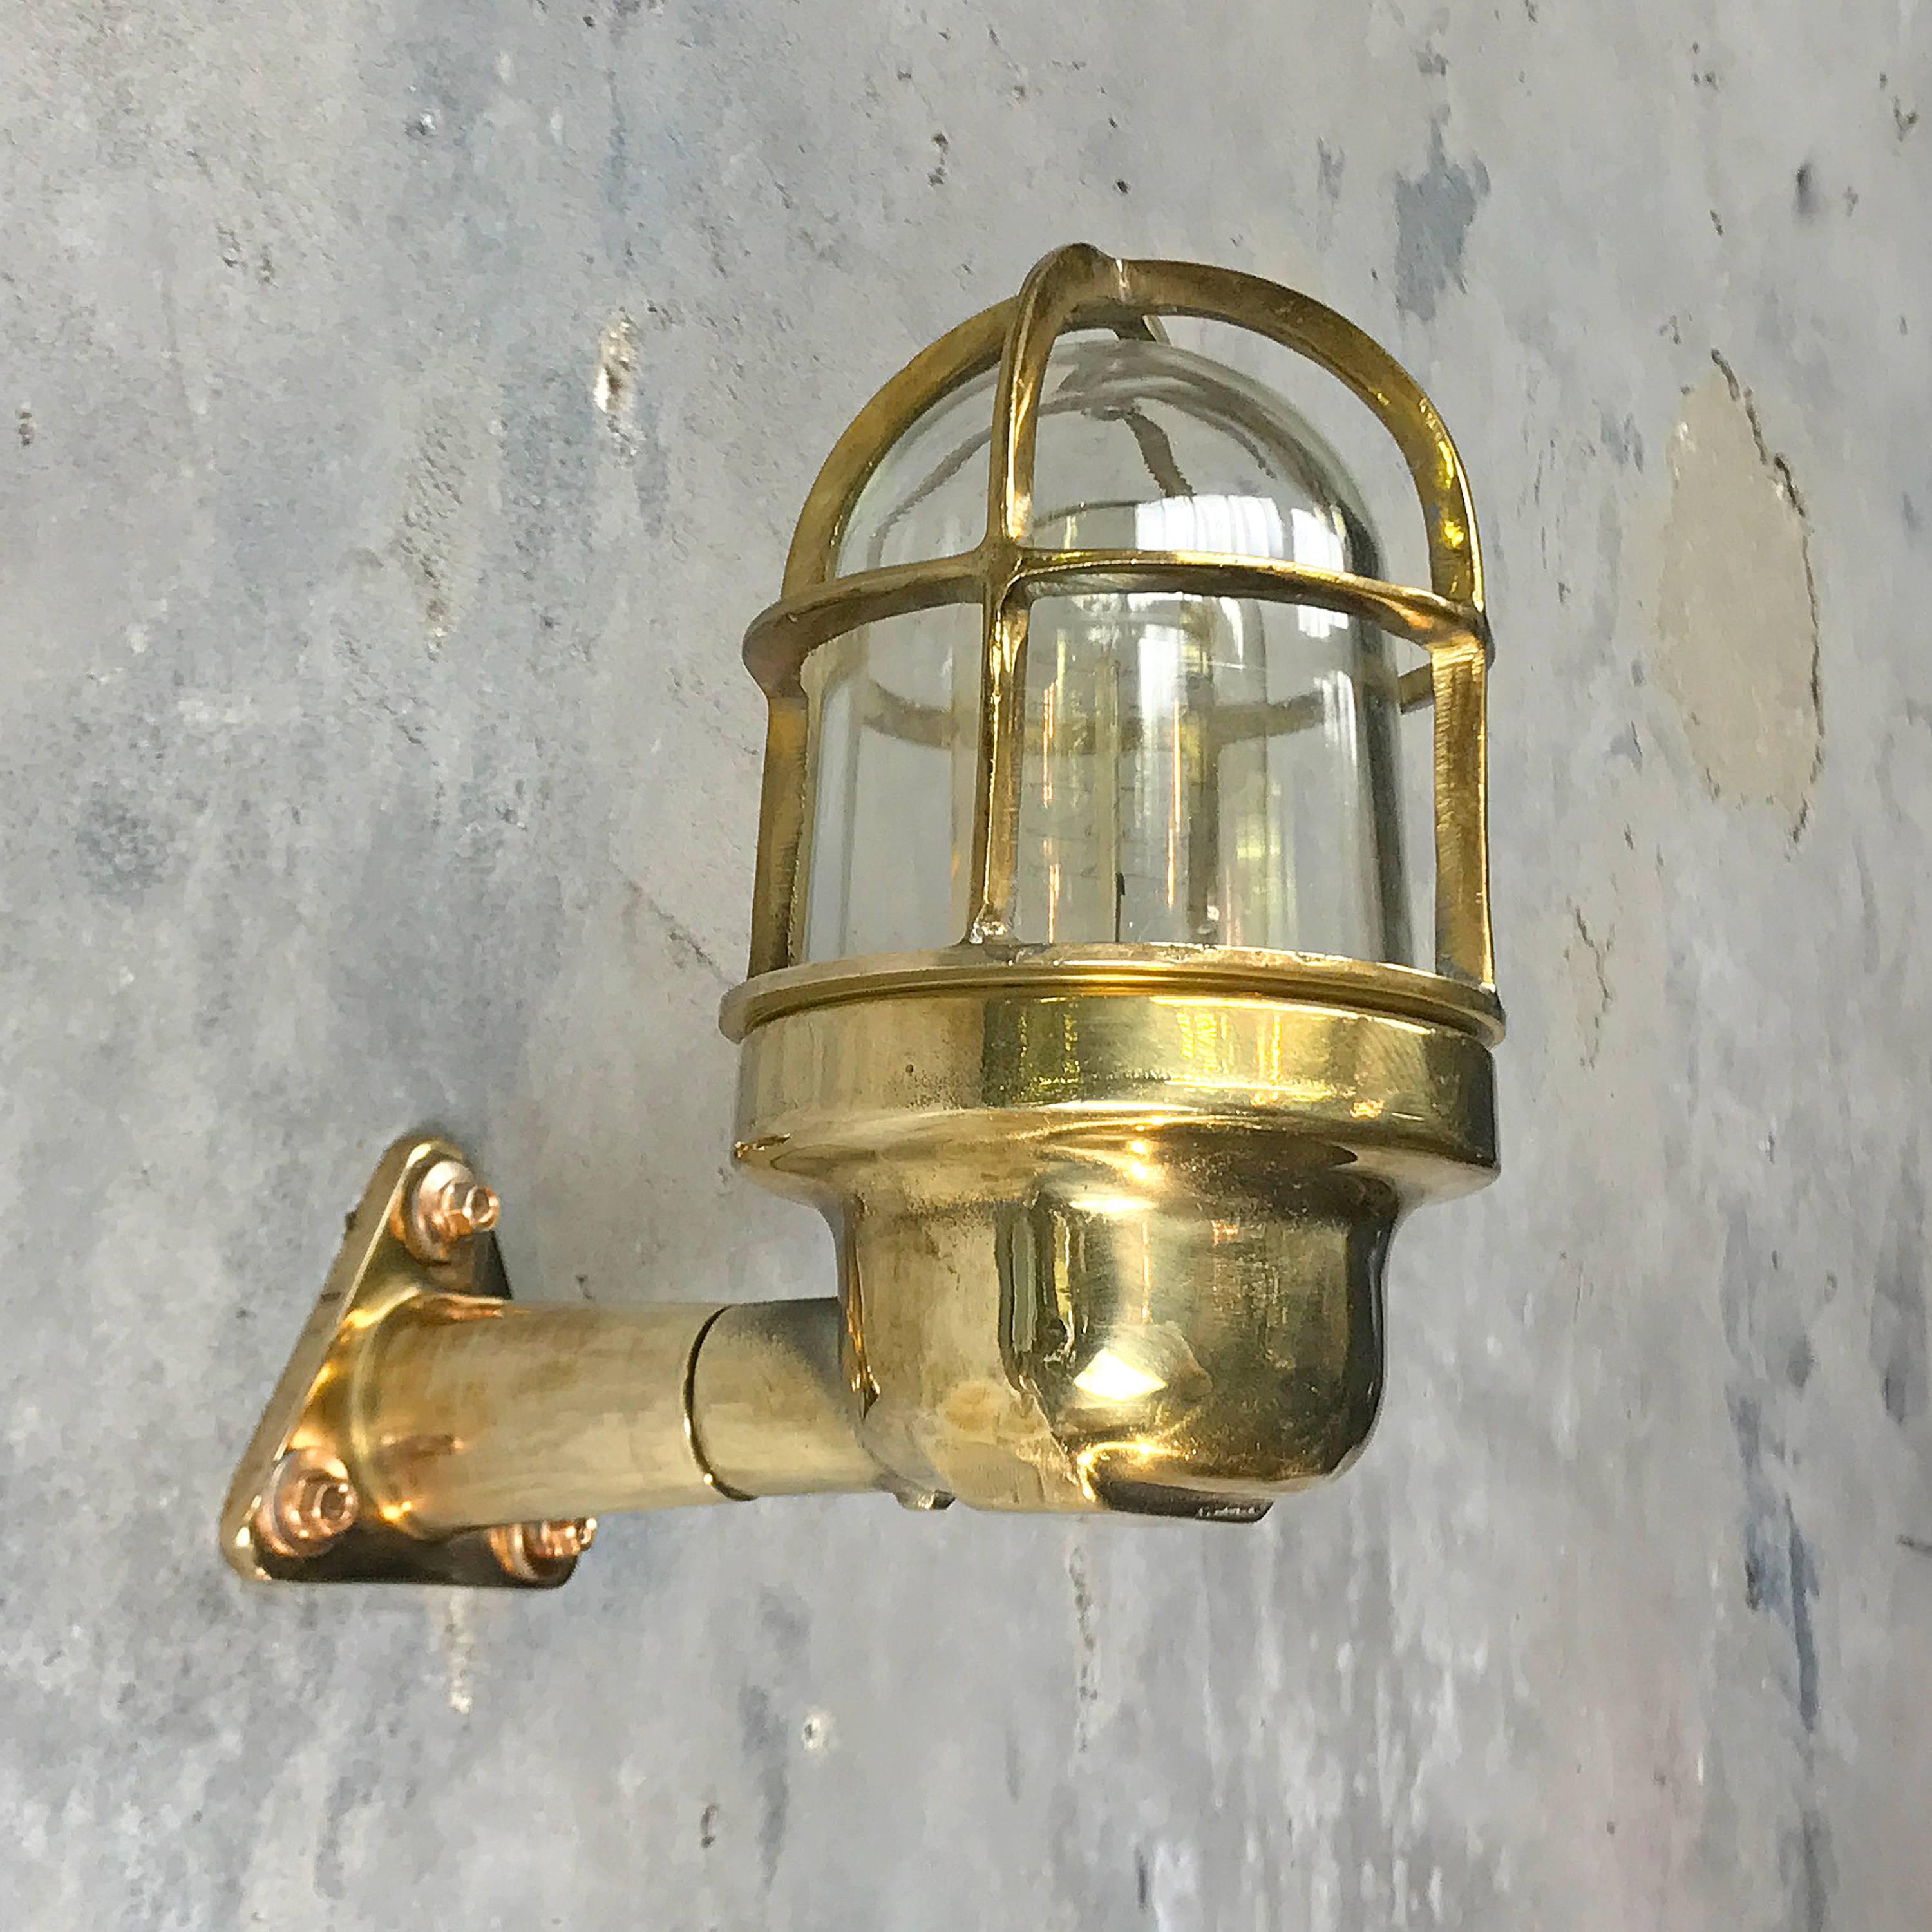 Pressed Late Century Industrial Brass 90deg Wall Light, Glass Dome & Cage, Edison Bulb